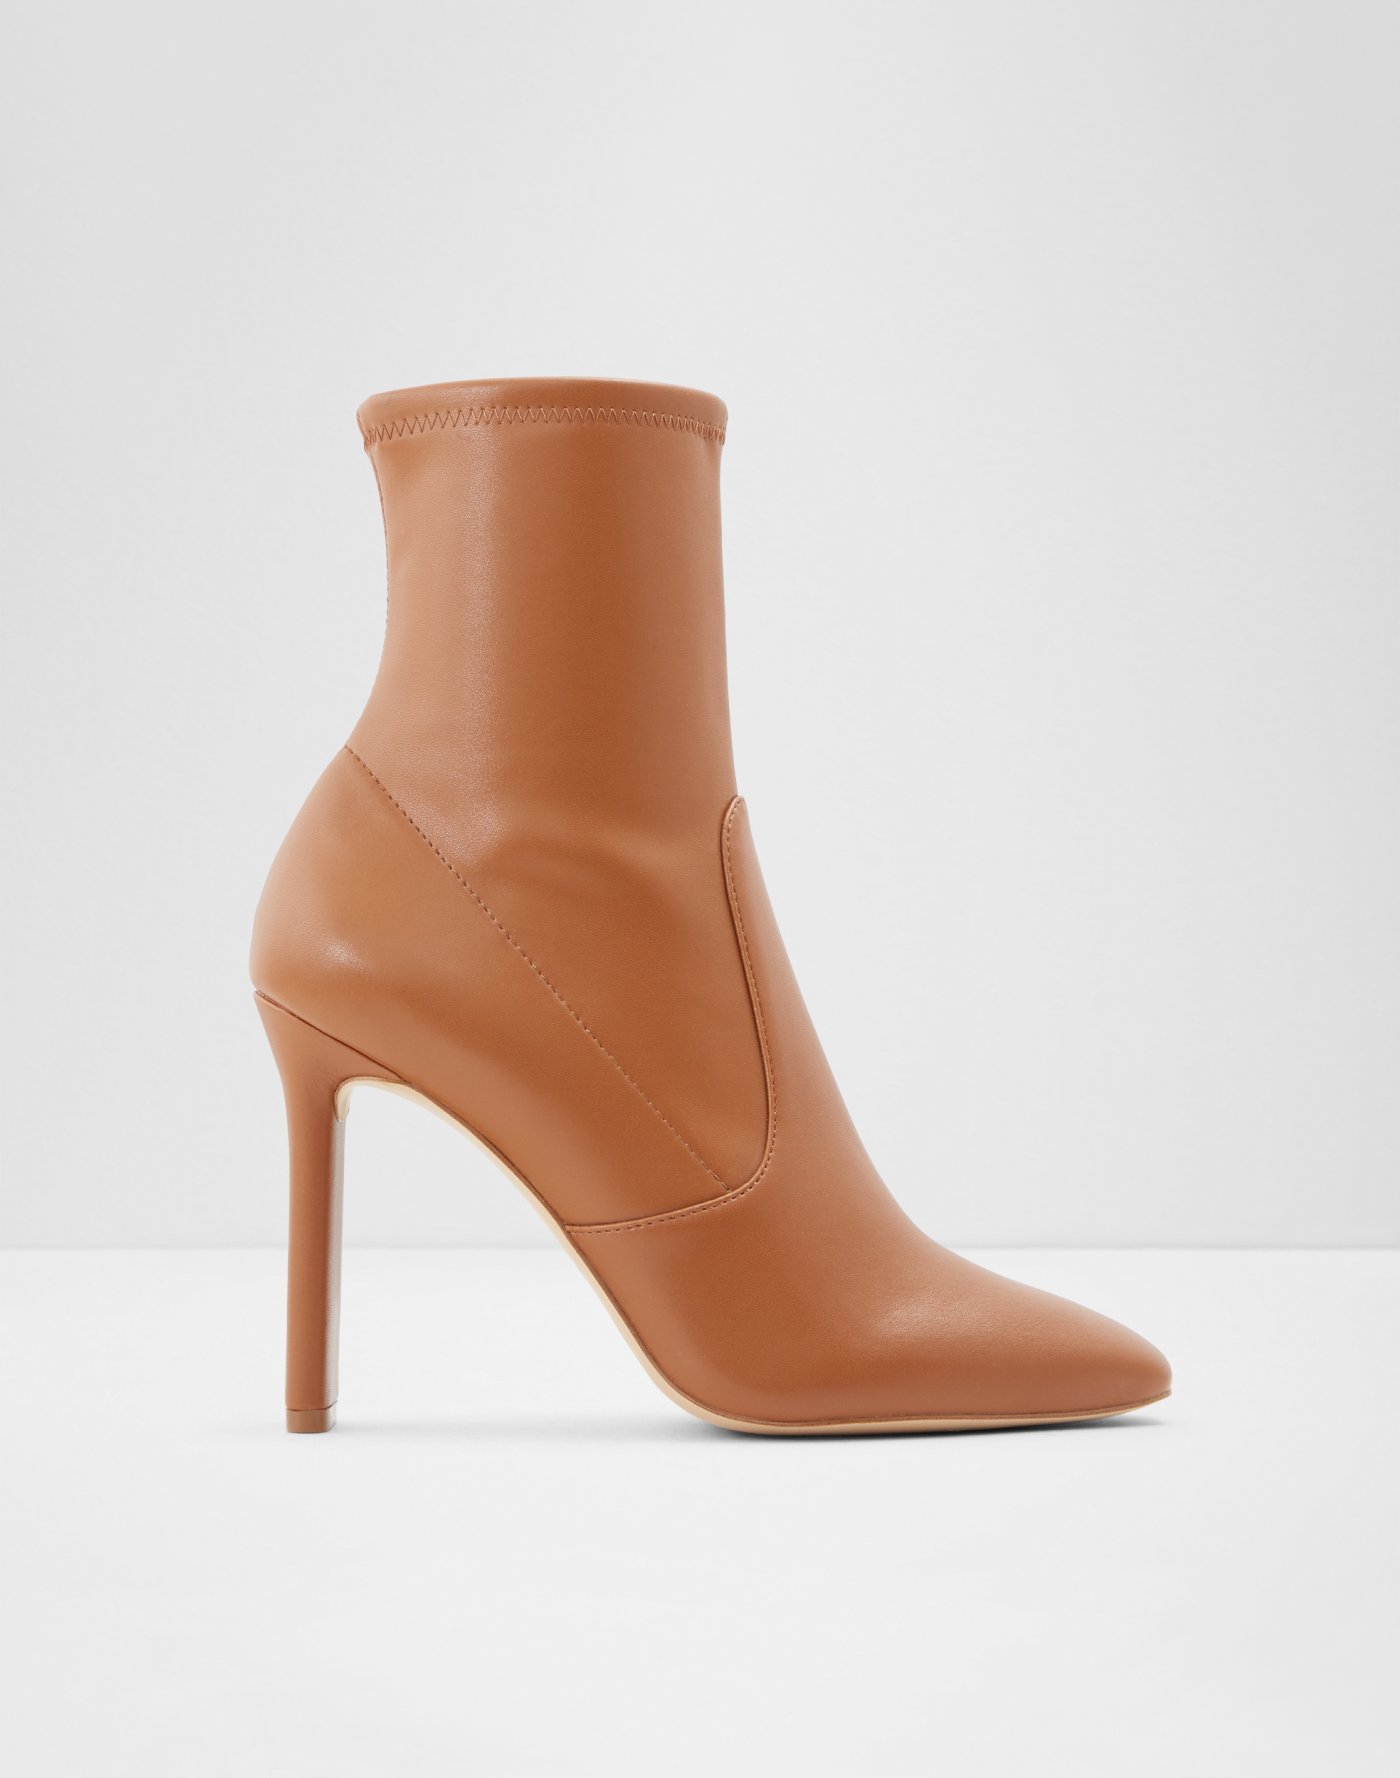 Boots, Booties \u0026 Ankle Boots | ALDO 